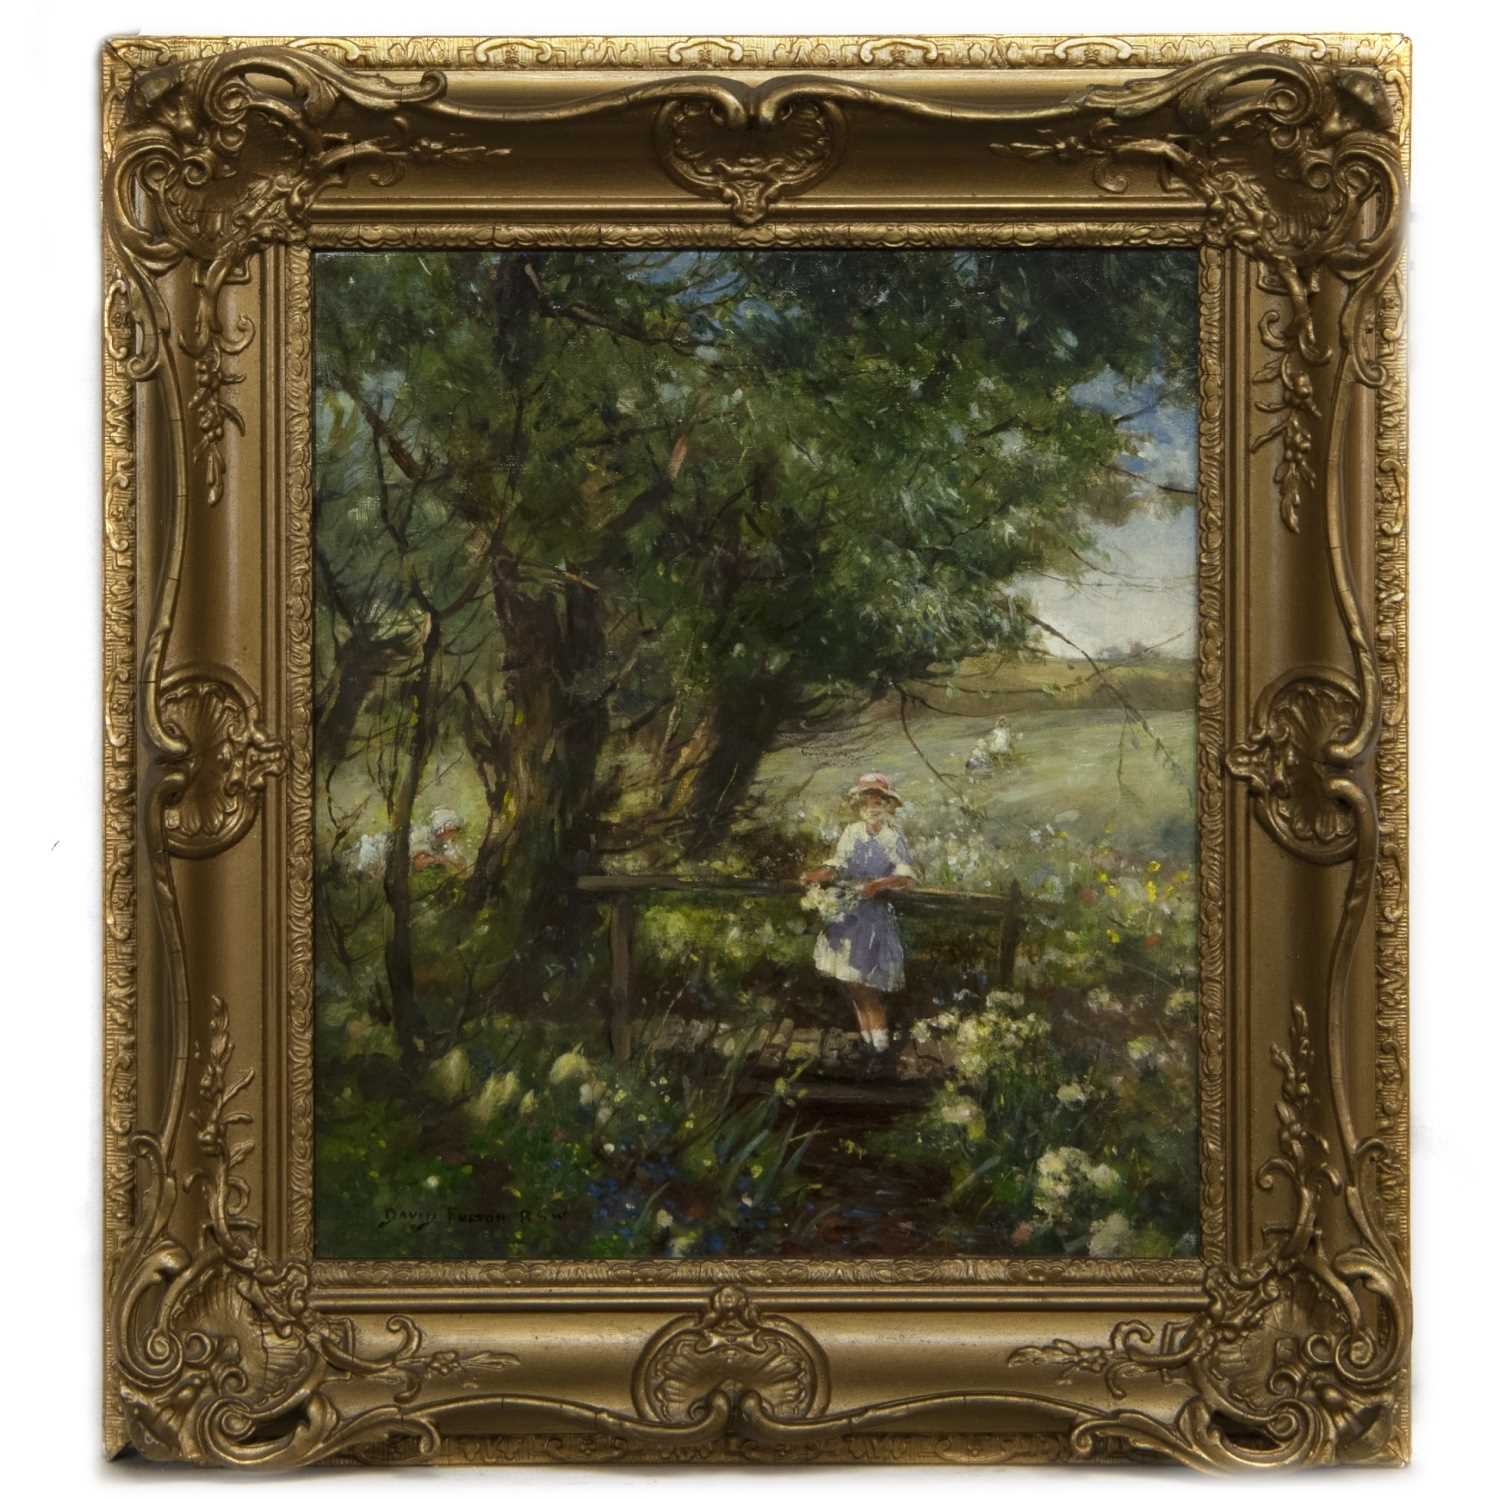 Lot 68 - QUEEN OF THE MEADOW, AN OIL BY DAVID FULTON